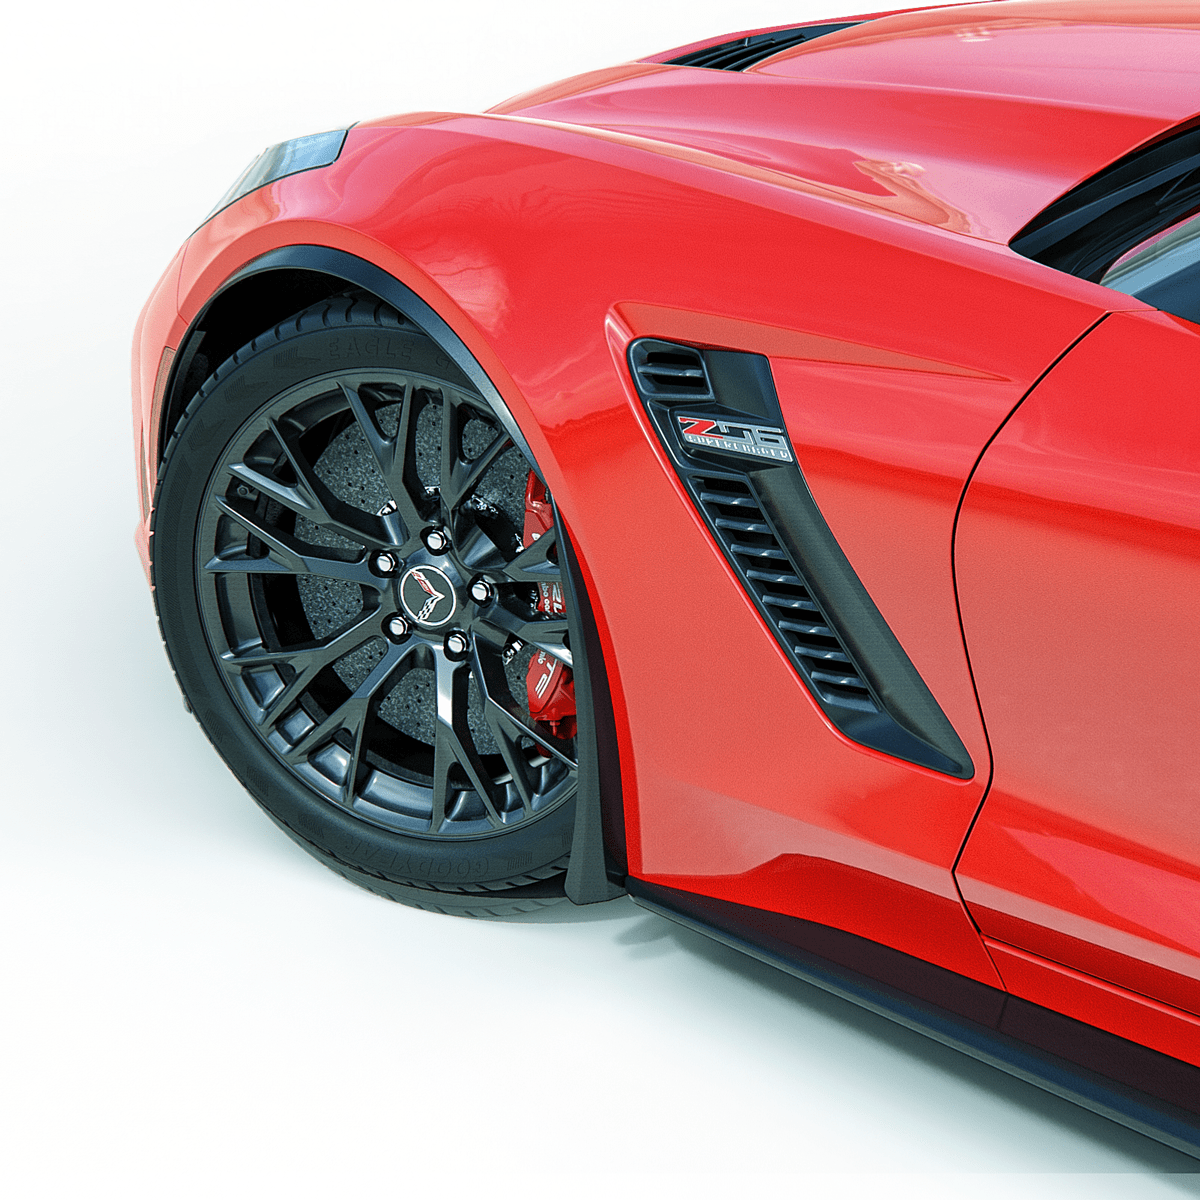 ACS Composite C7 XL Front Wheel Rock Guards Mudflaps [45-4-193]HCB - Ultimate protection against rock chips and road debris for all C7 Corvette models.